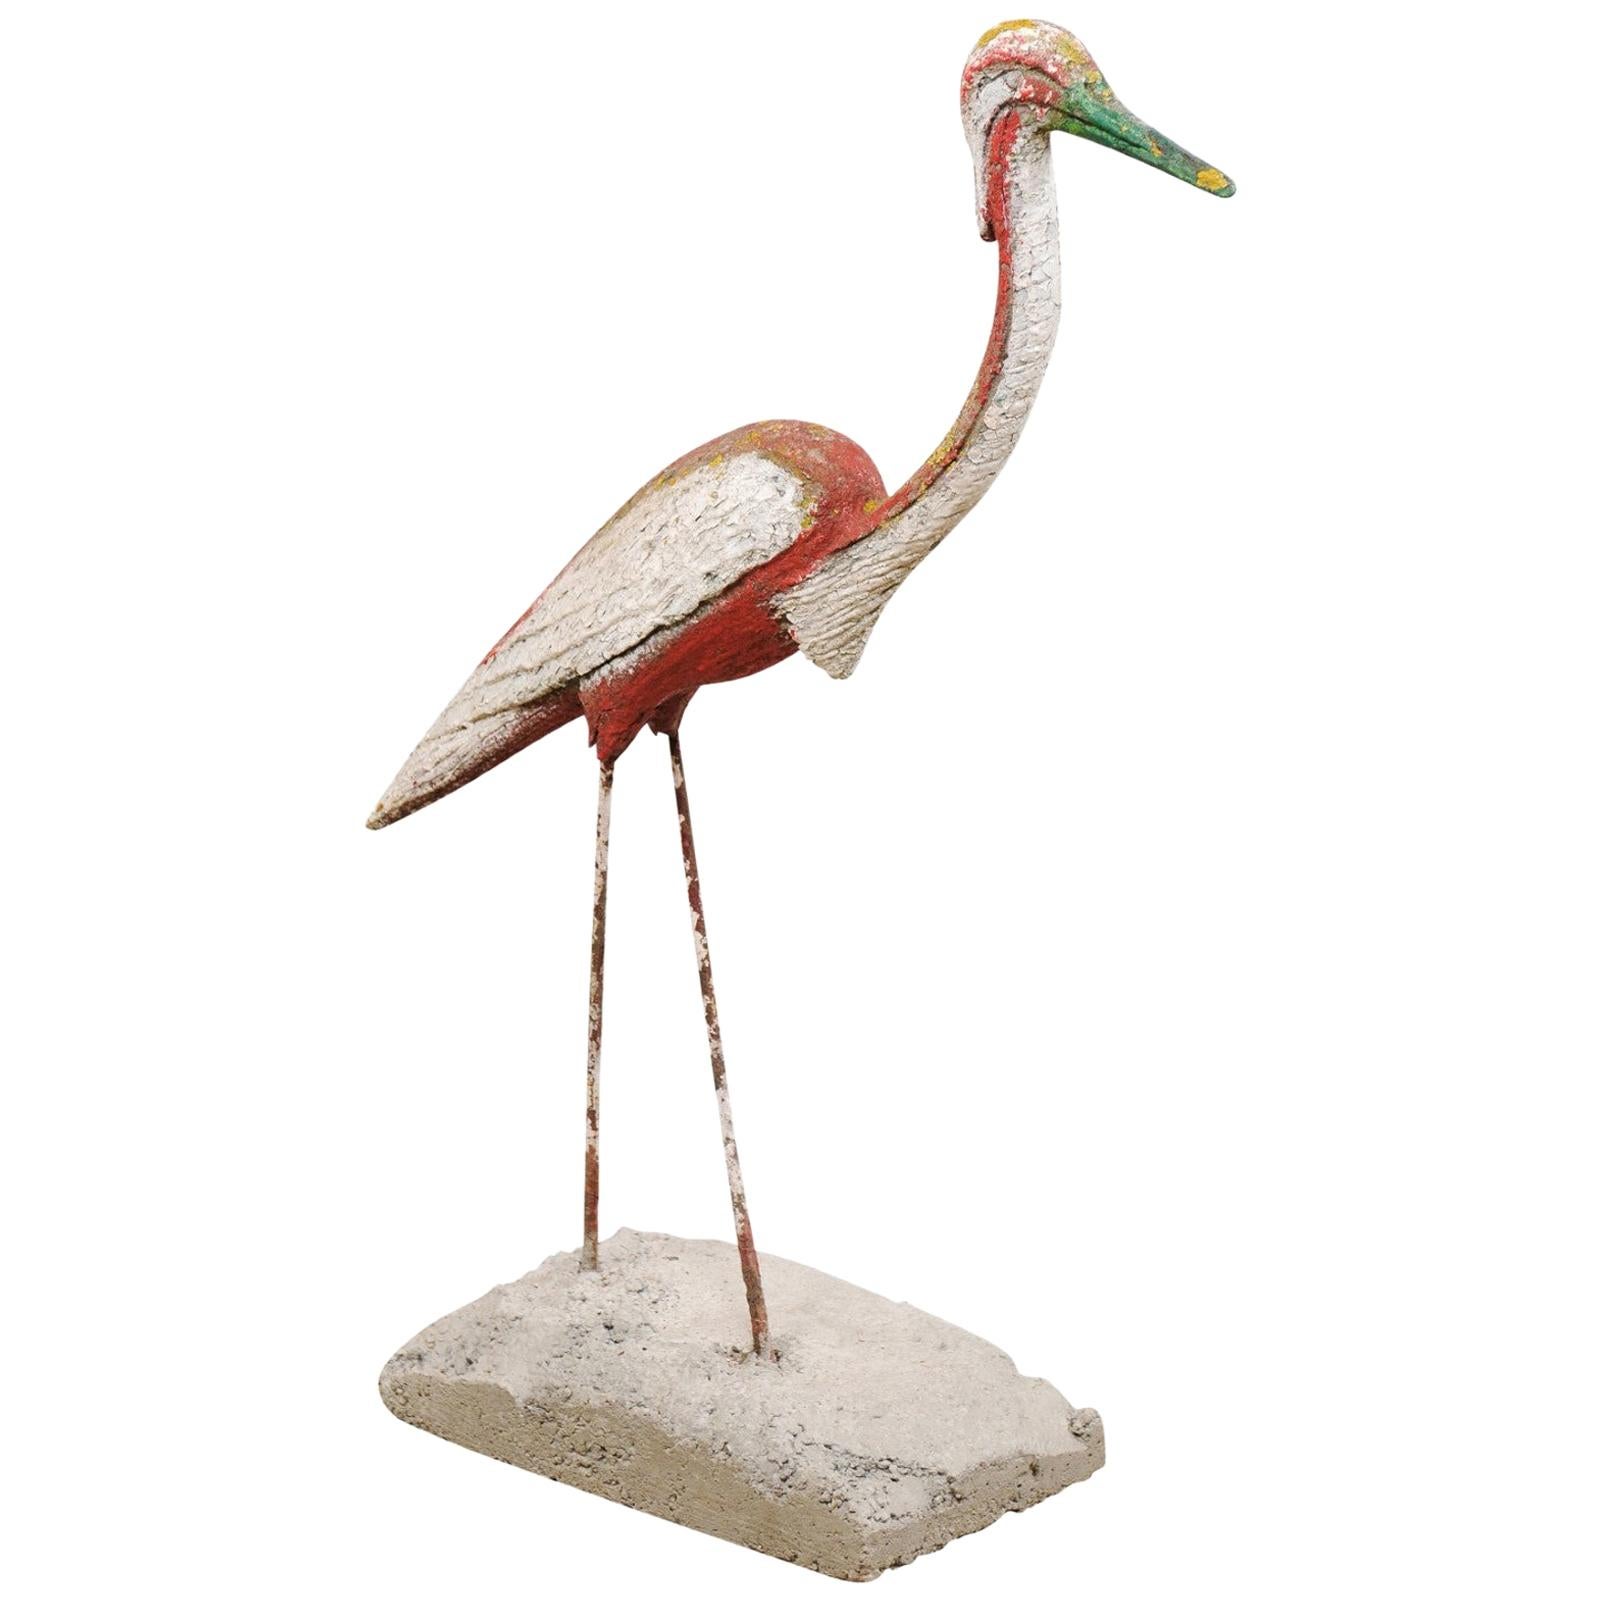 French Garden Bird Statue of a Walking Crane, Stands For Sale